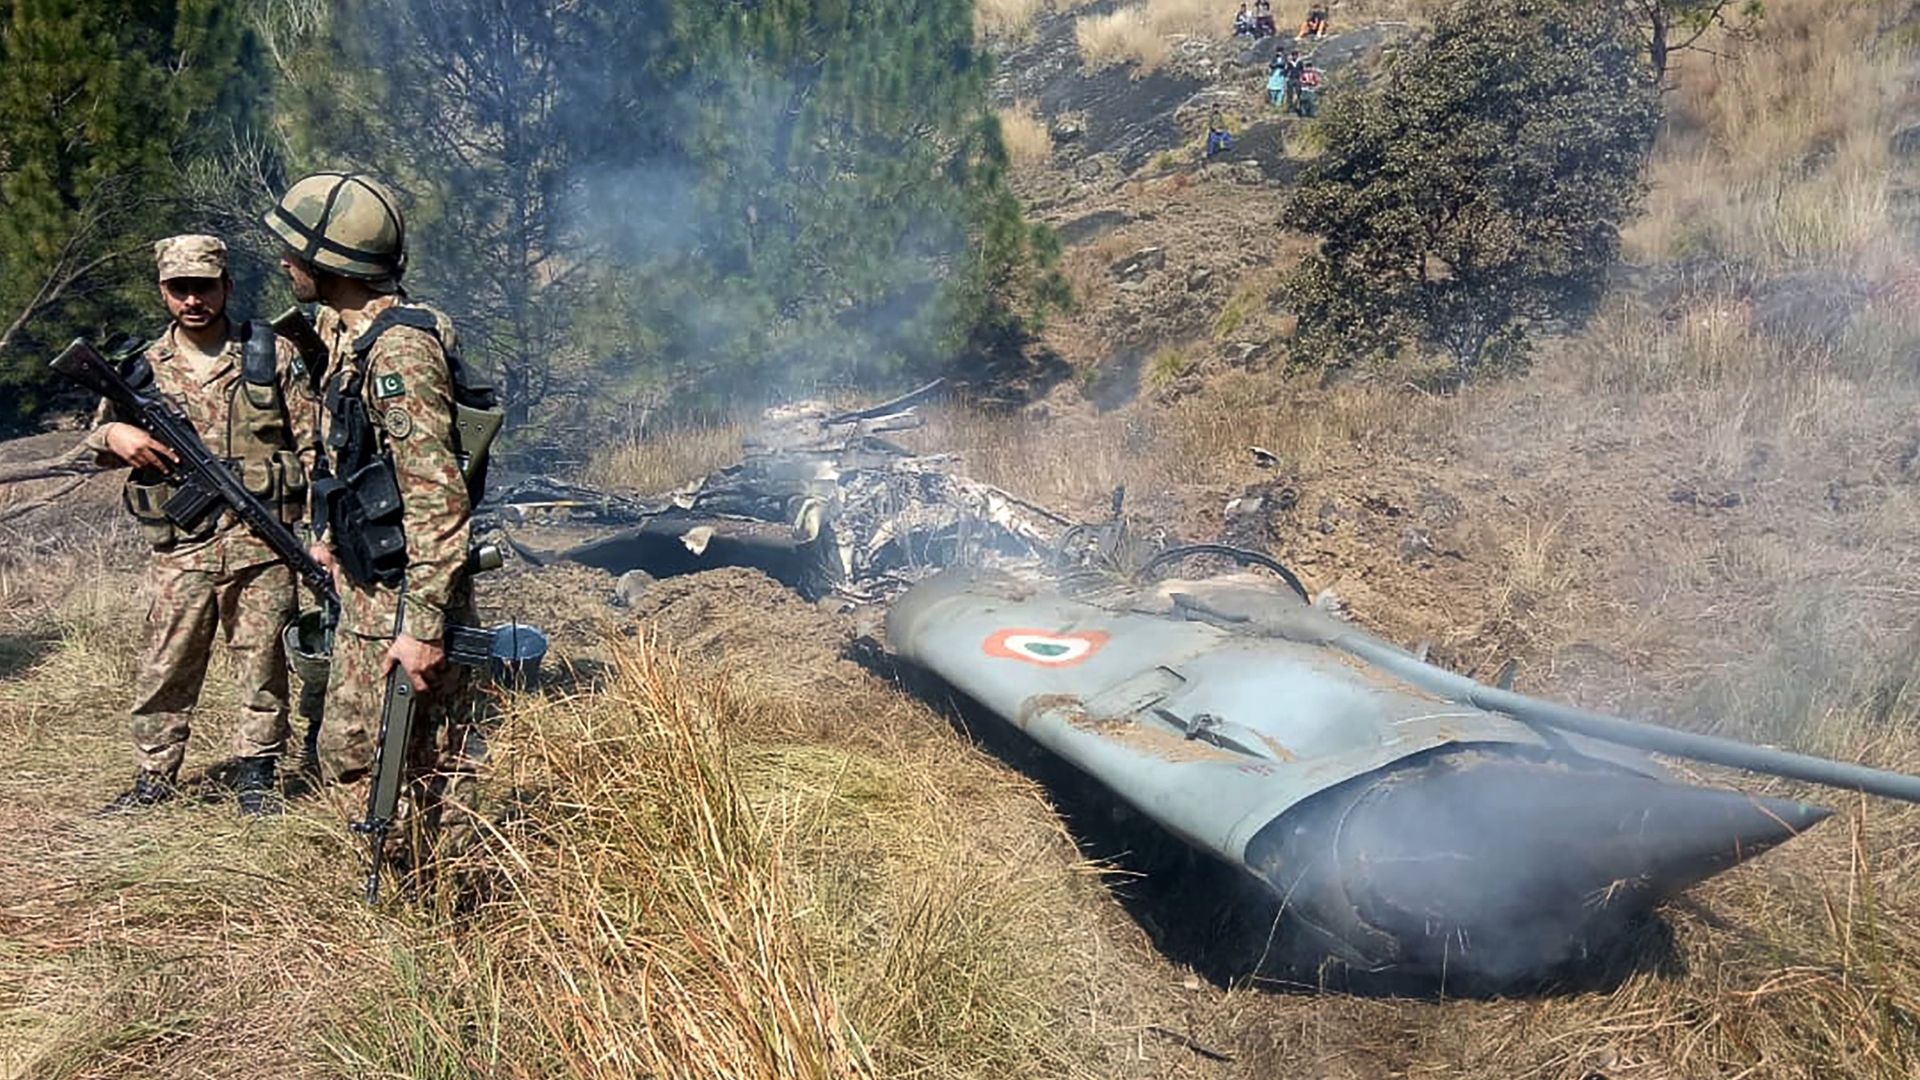 Pakistani soldiers stand next to what Pakistan says is the wreckage of an Indian fighter jet shot down in Pakistan controled Kashmir at Somani area in Bhimbar district